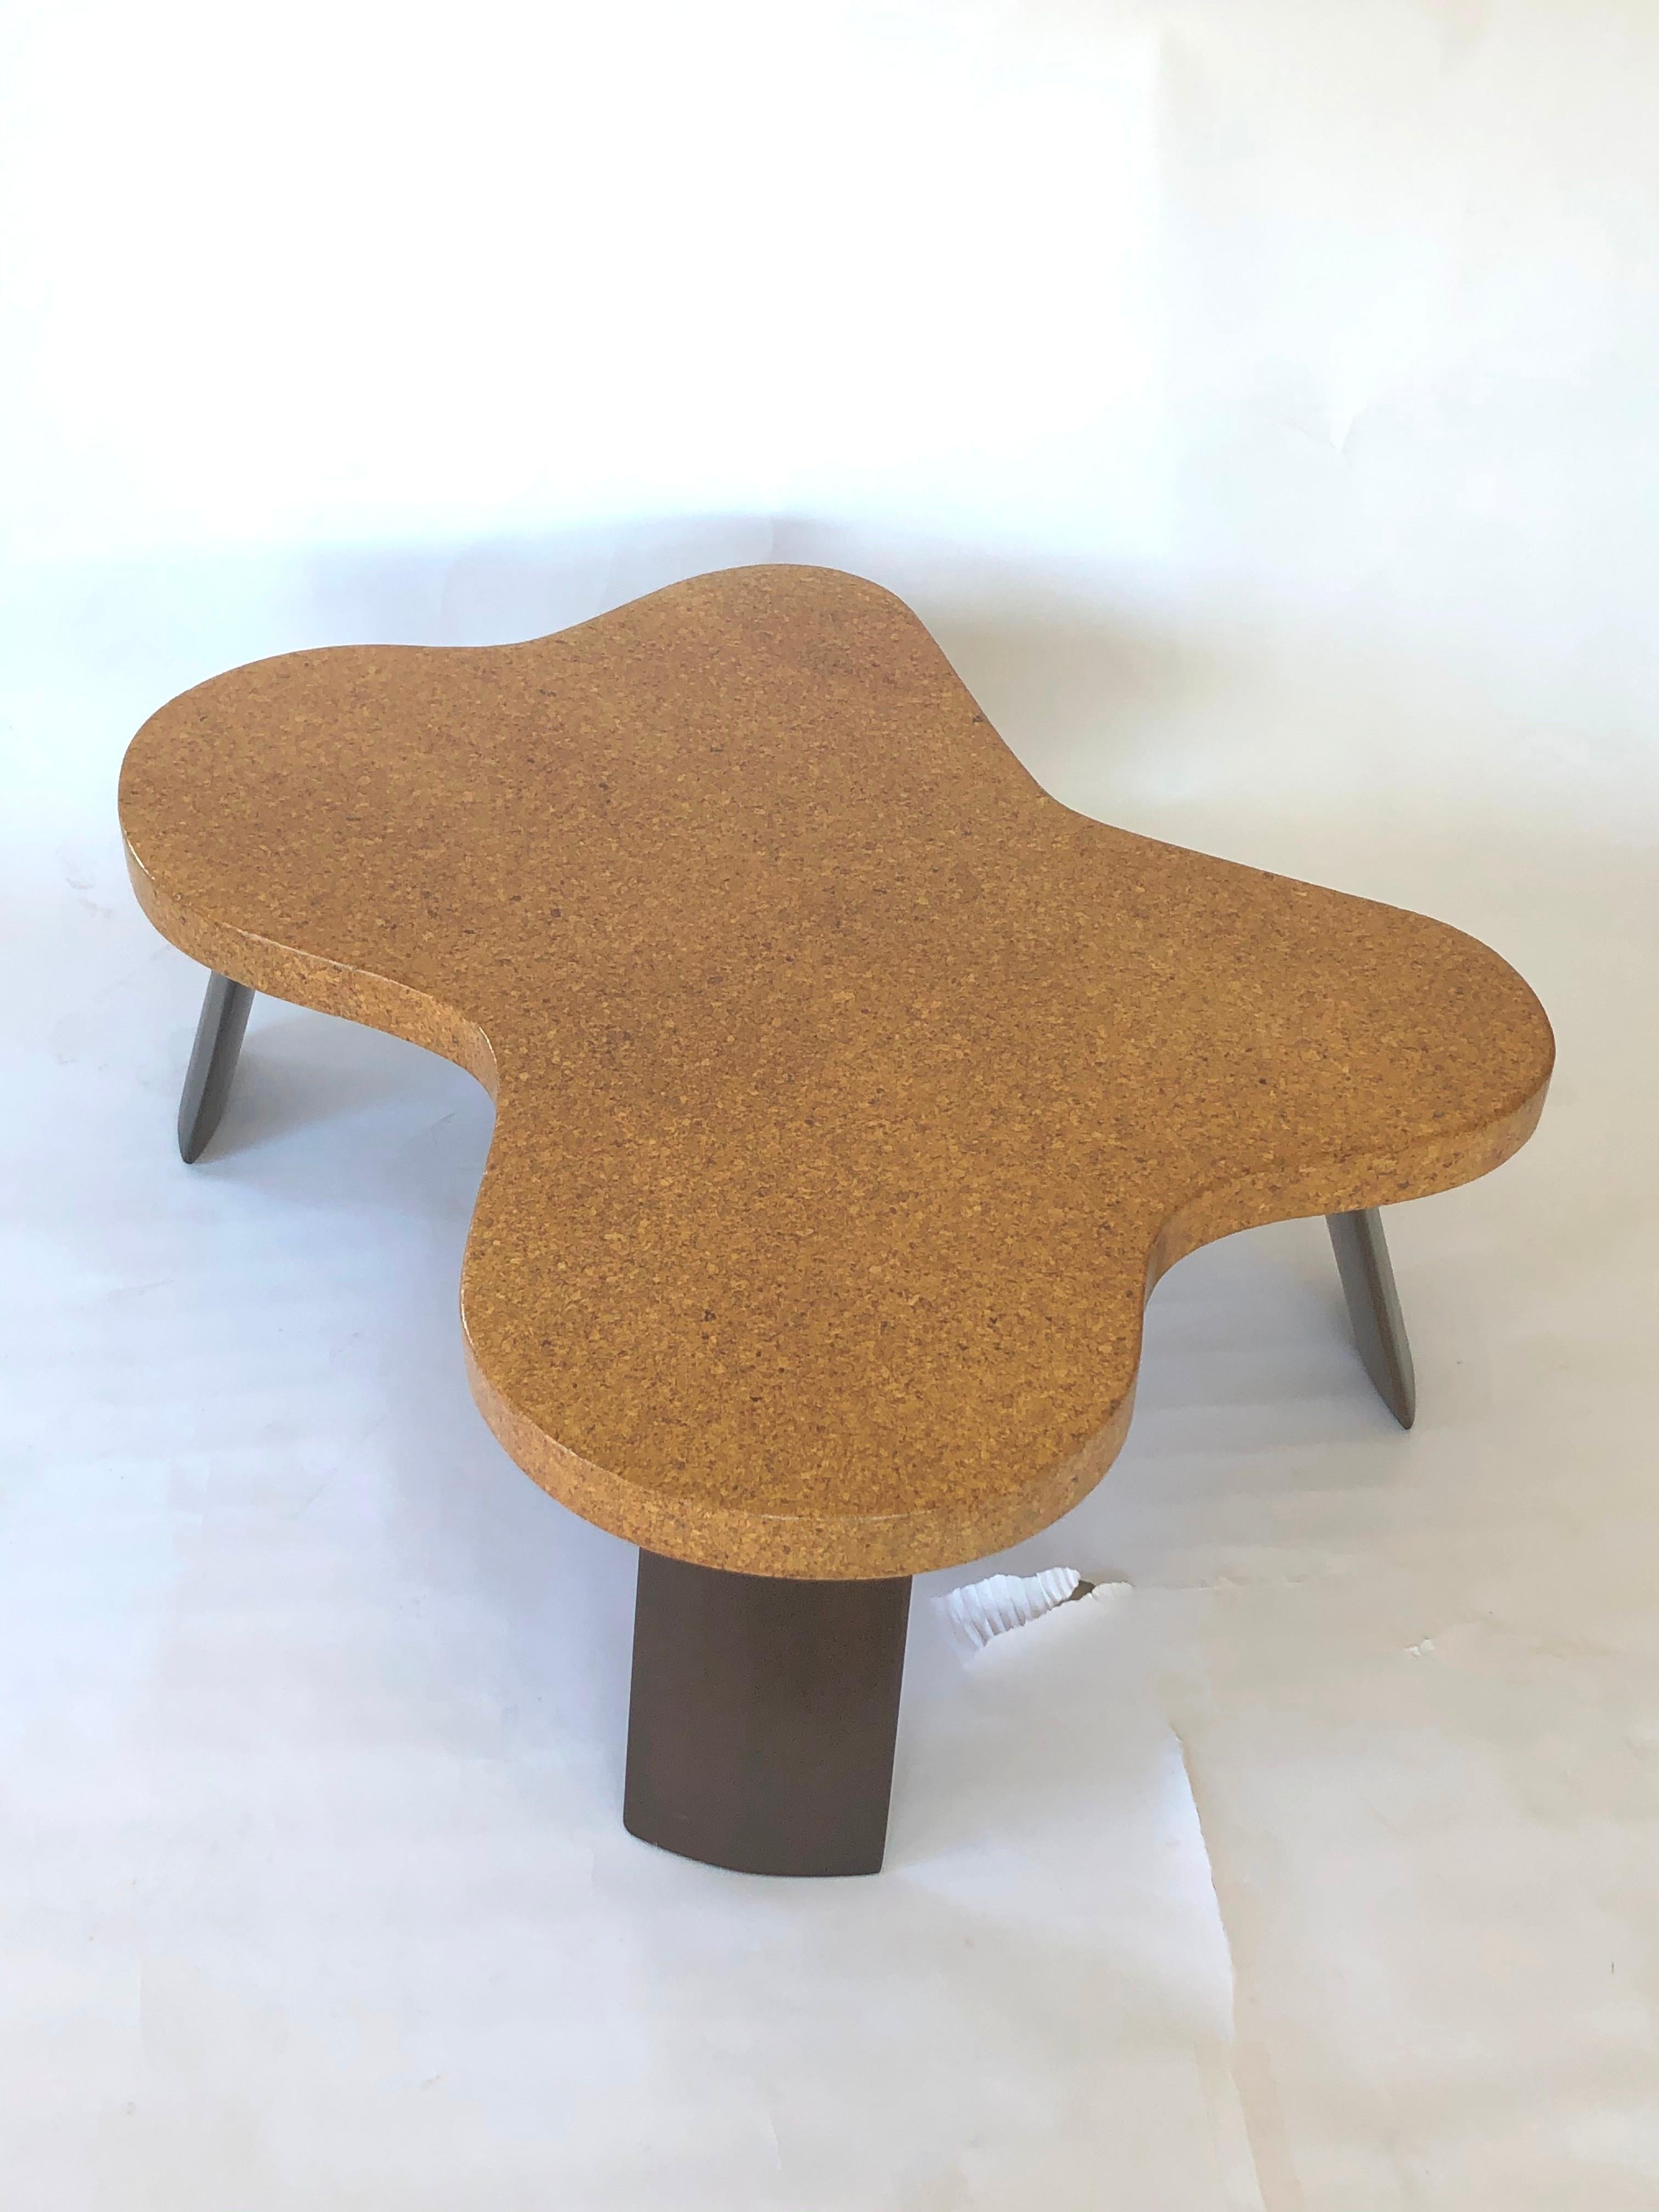 Very unique coffee table by Paul Frankl, Model 5005, numbered on the underside, USA, circa 1950. Original natural cork and mahogany legs.